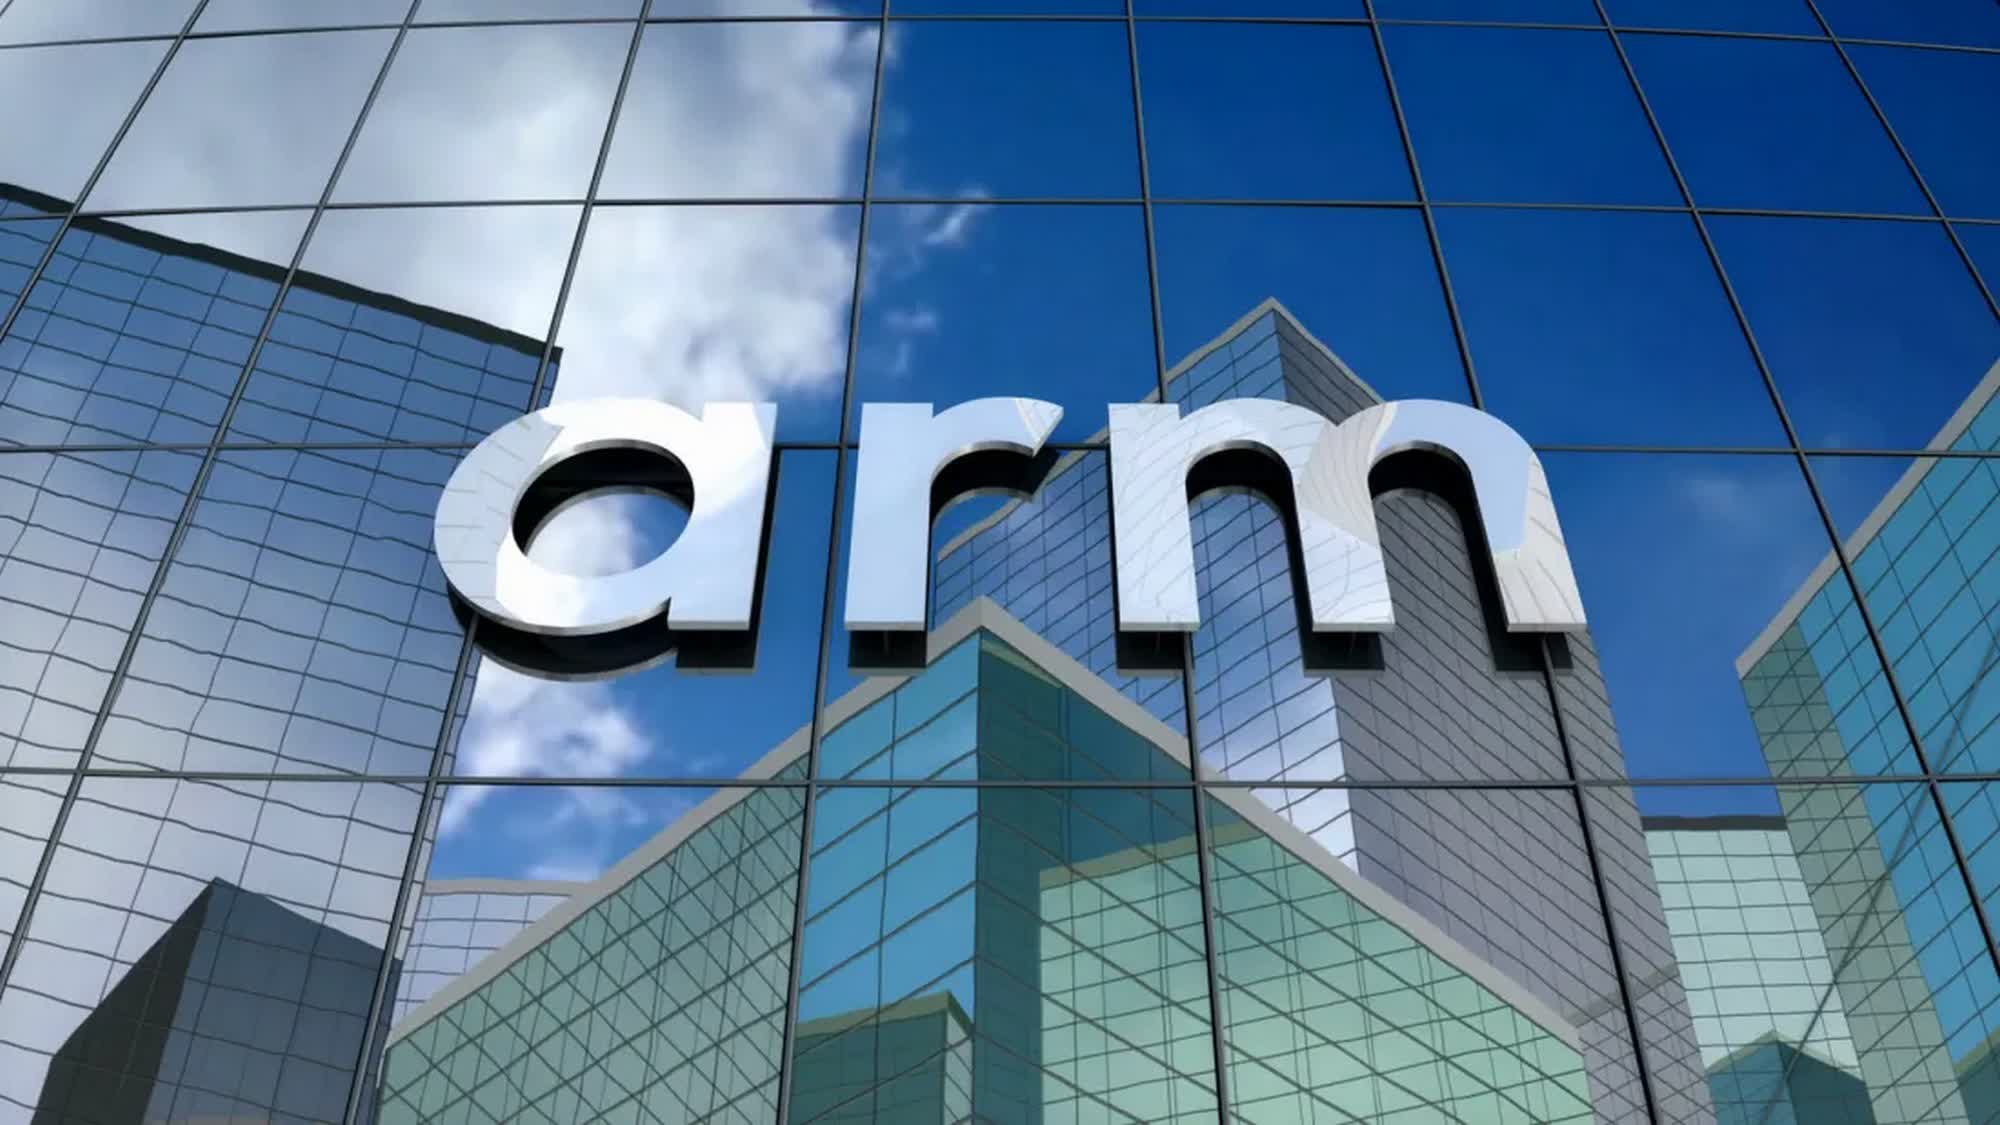 Tech giants Amazon, Apple, and Samsung could be major investors in Arm's IPO